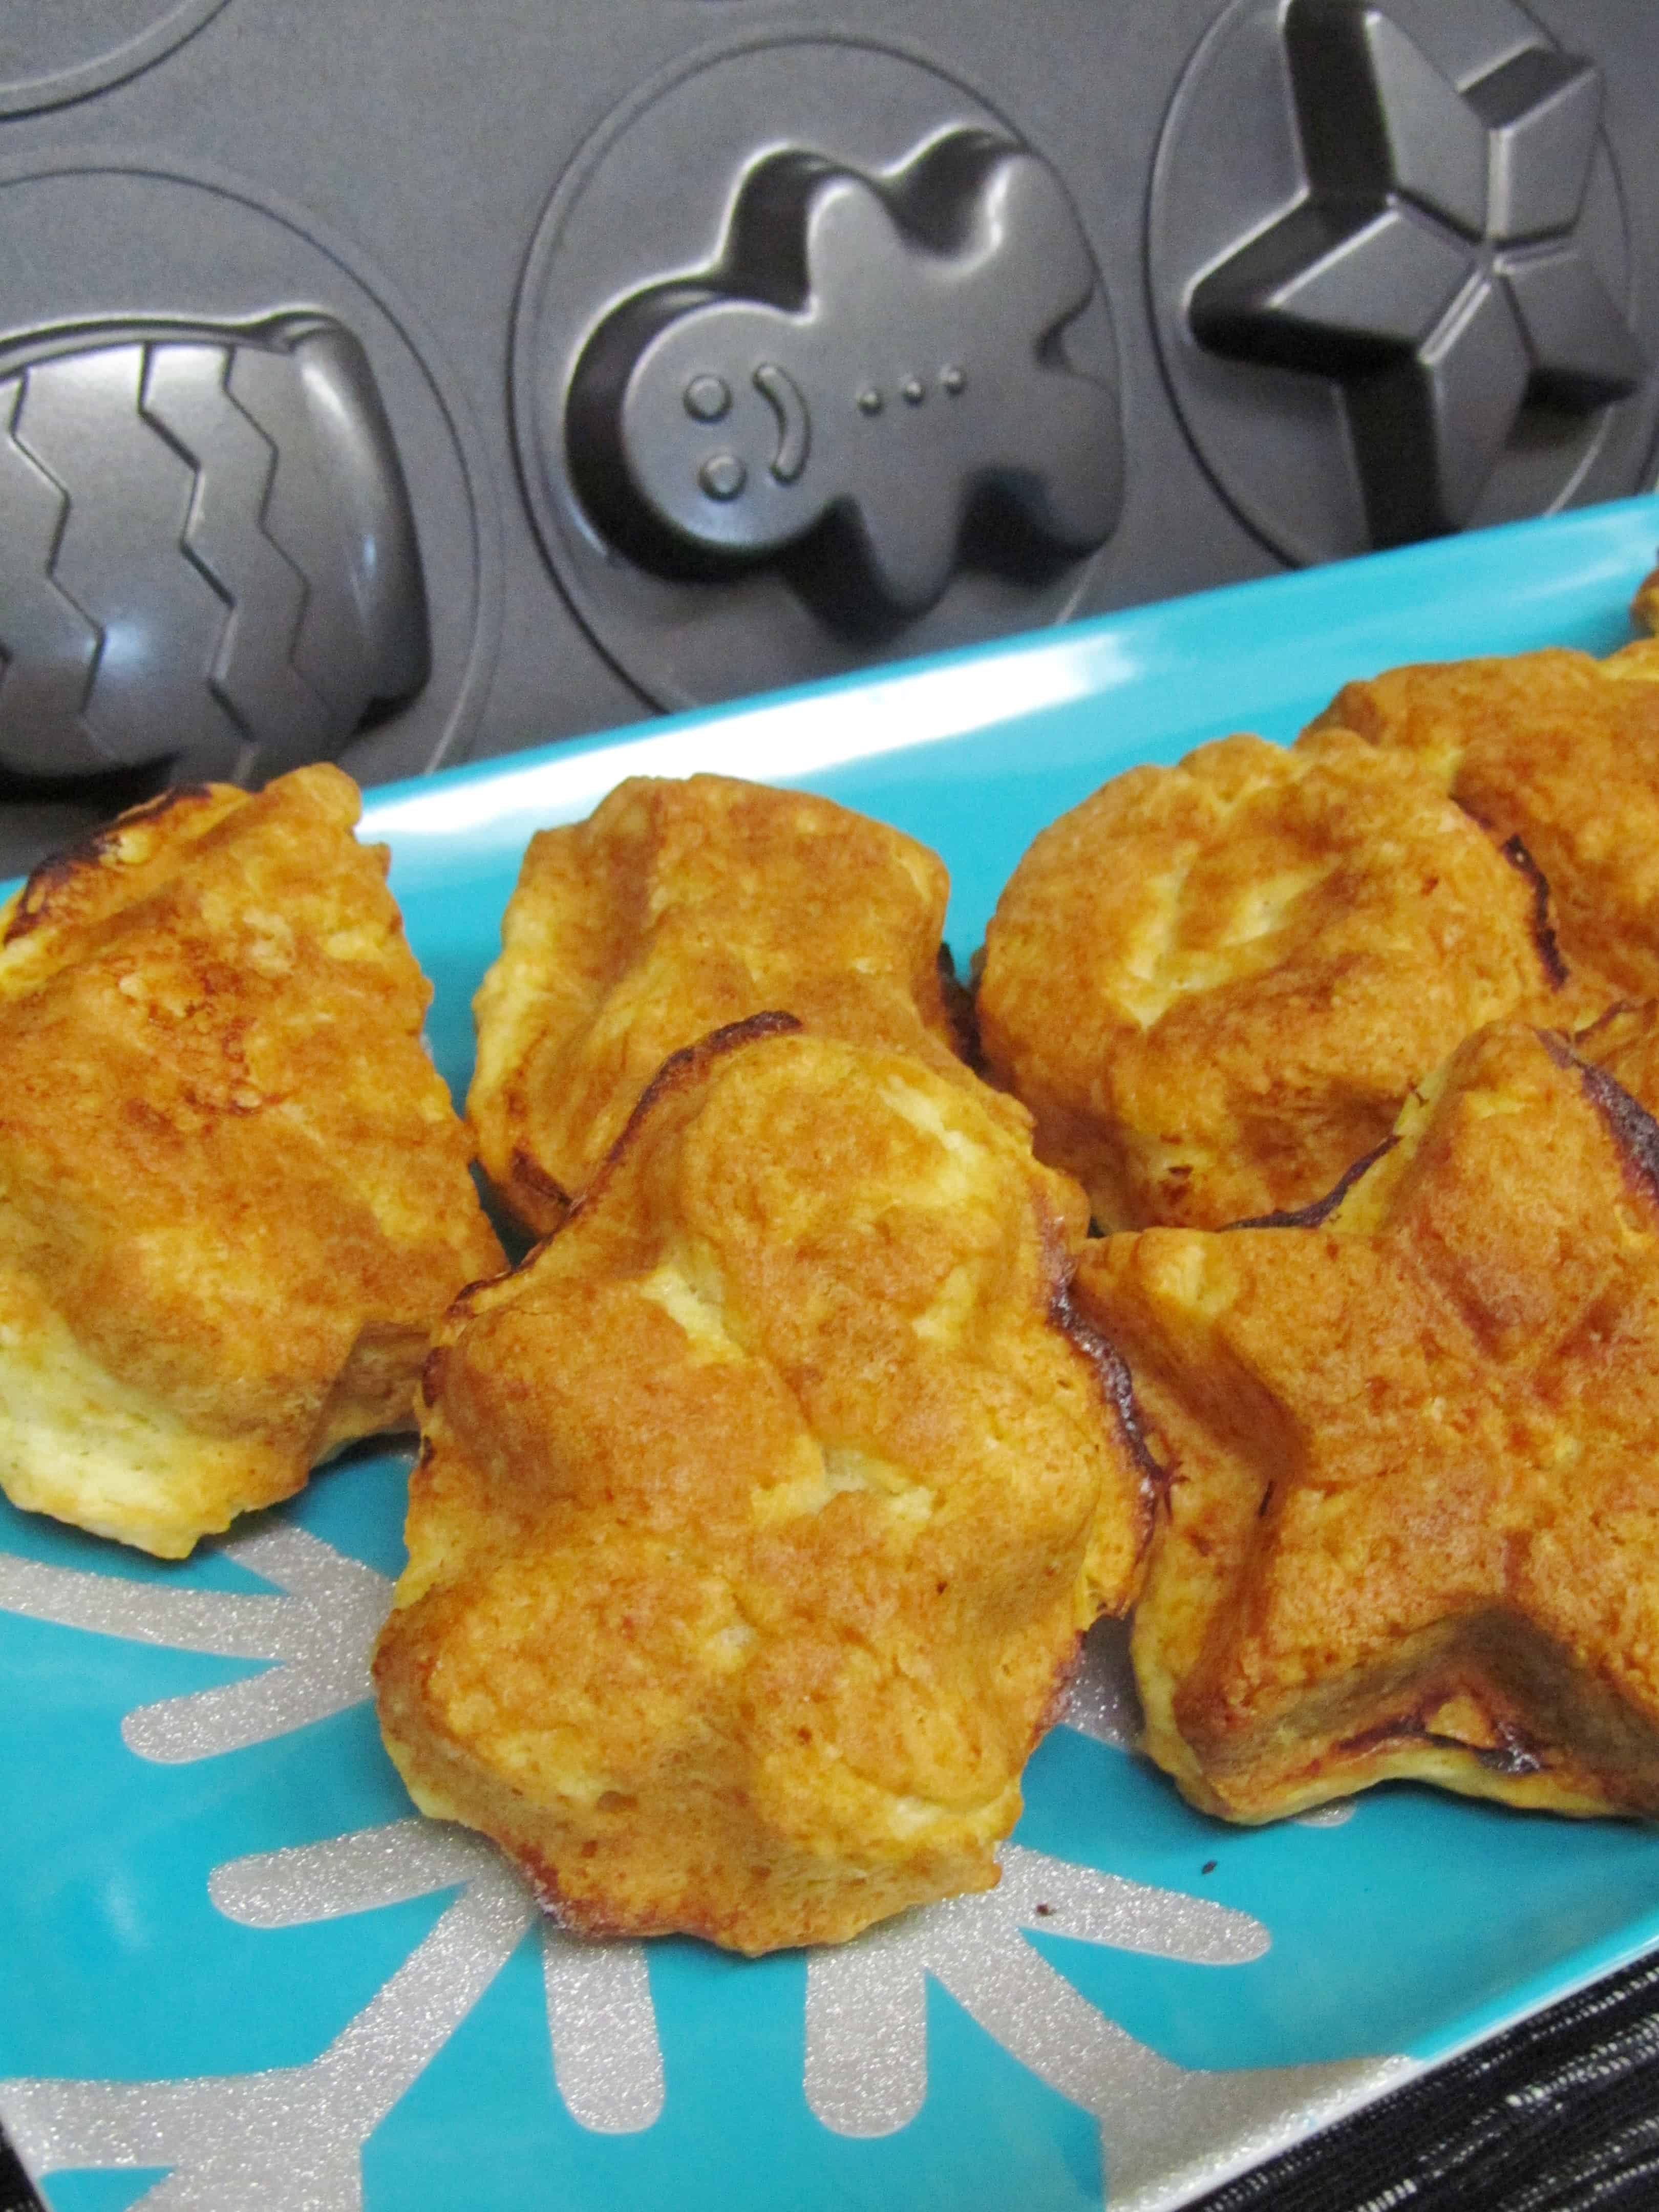 Review: Wilton Non-Stick Mini Holiday Pan & Buttermilk Biscuits